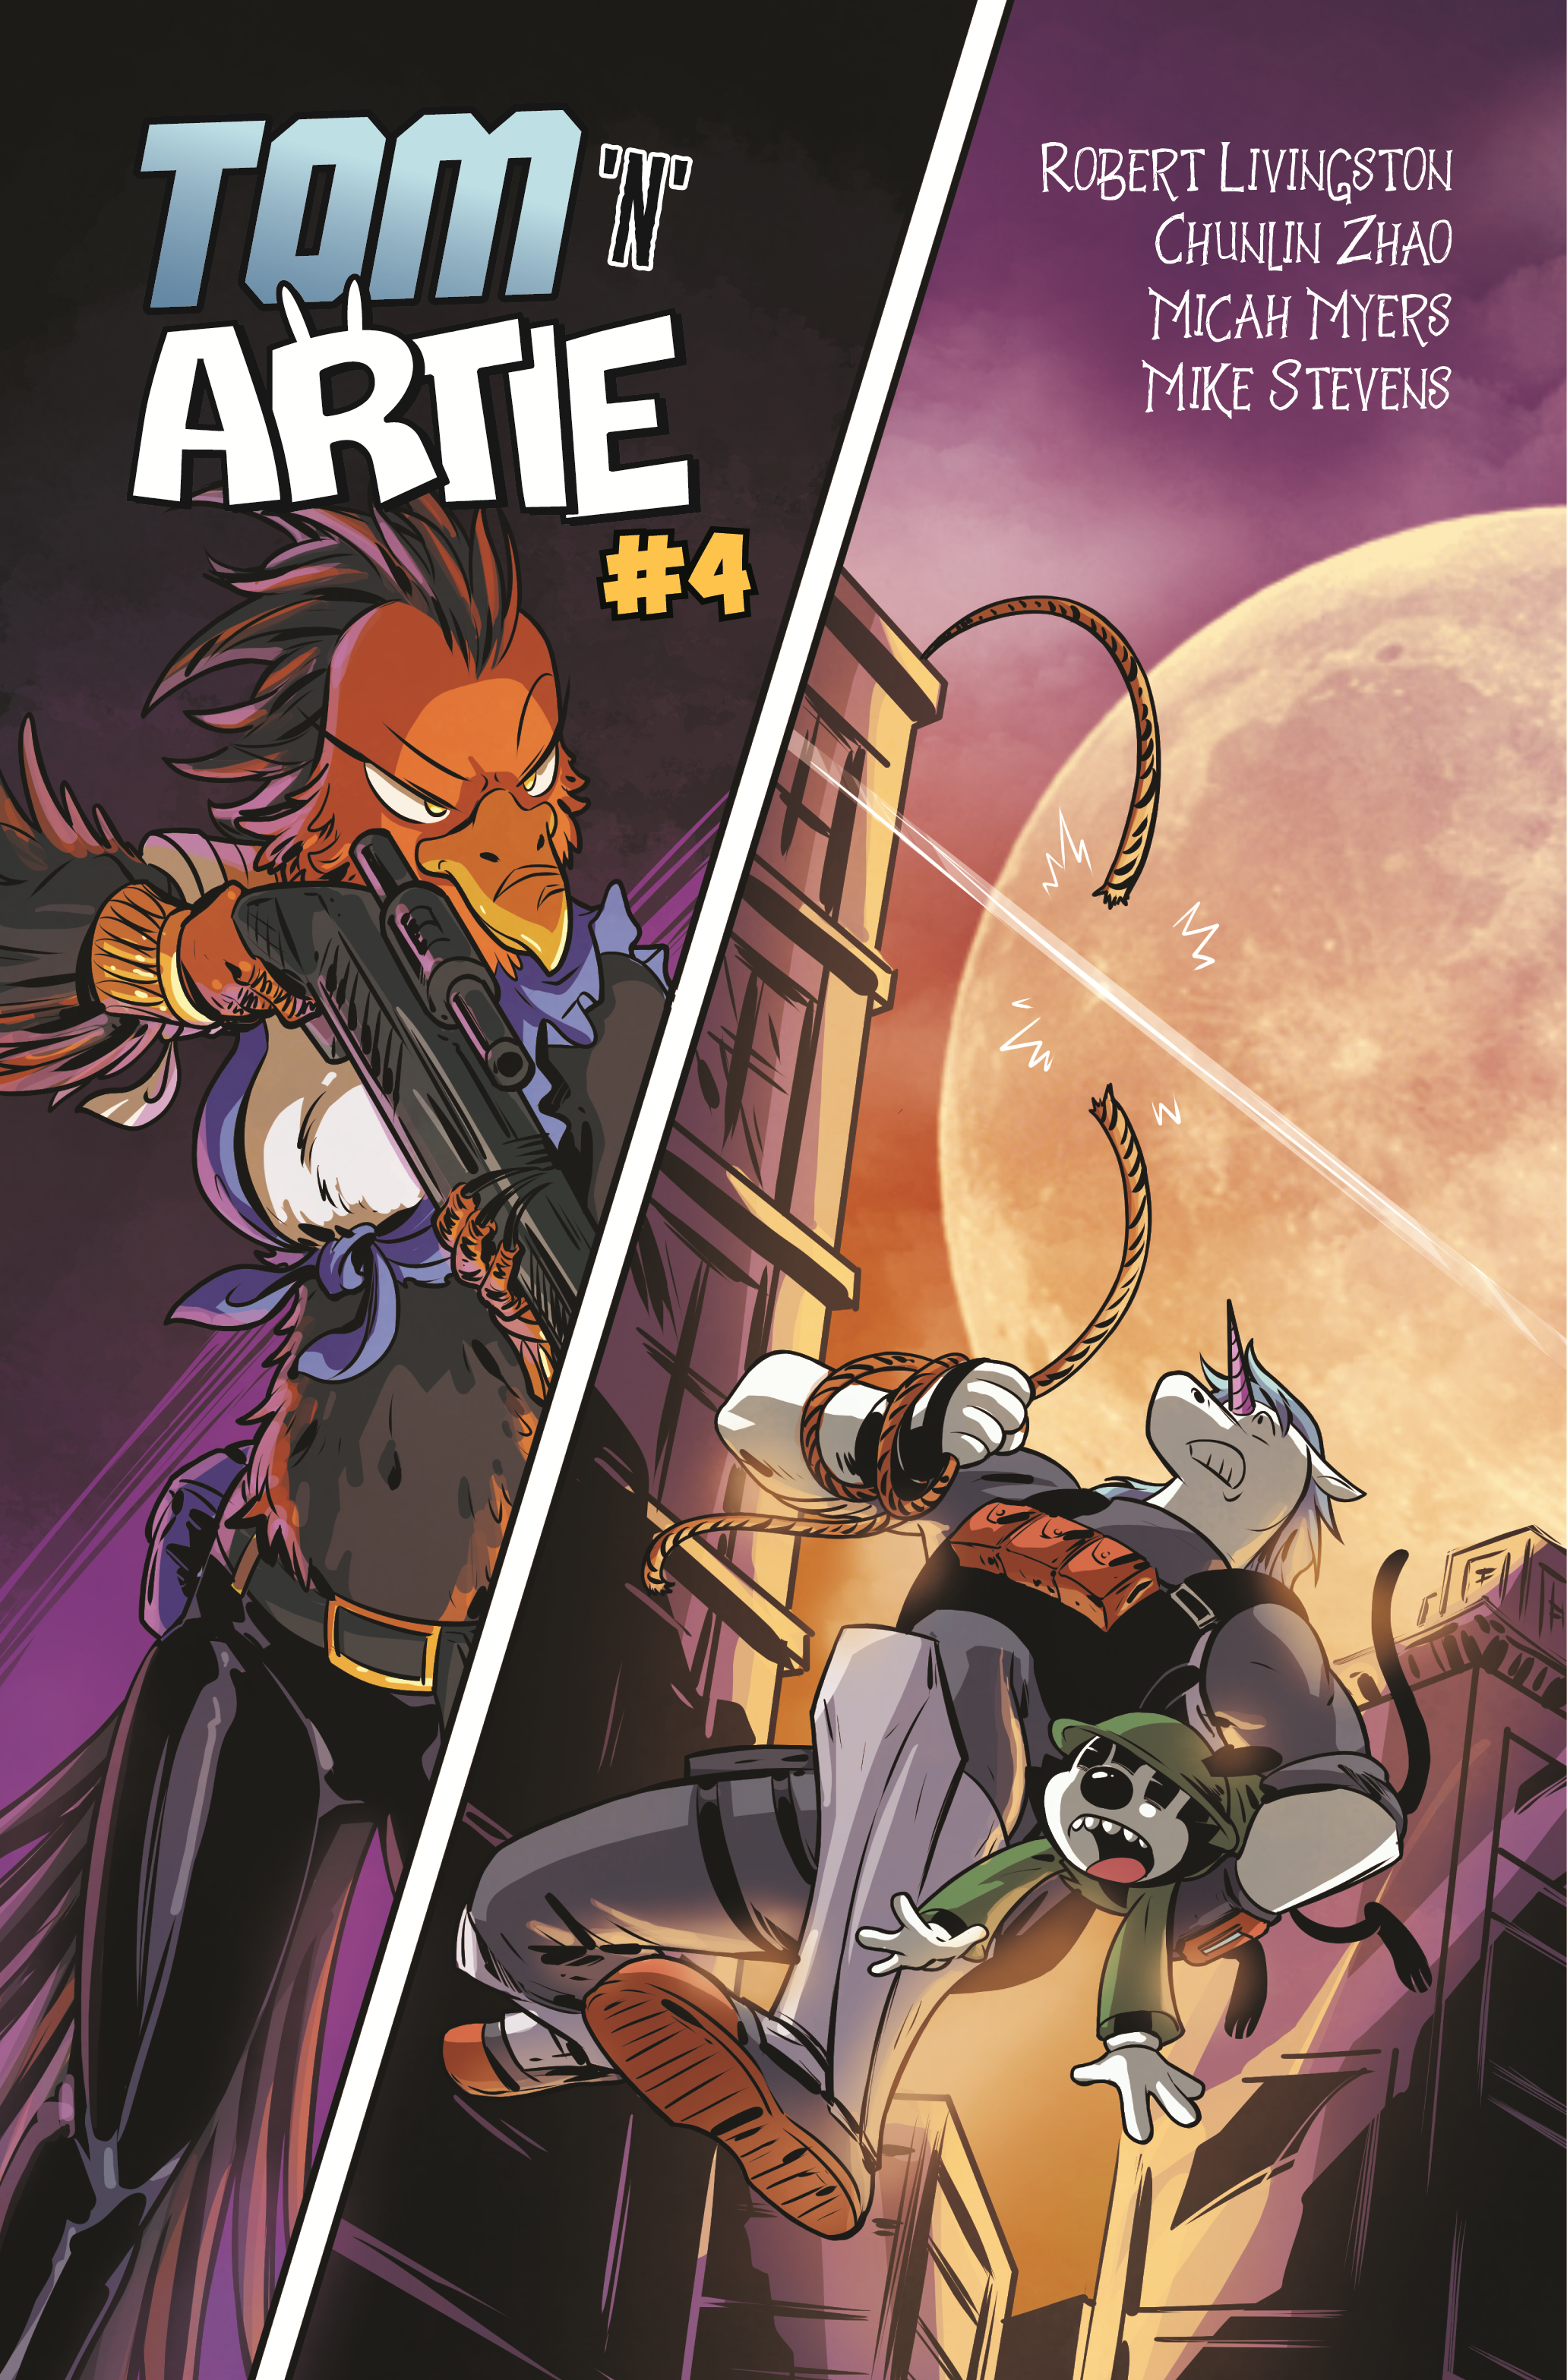 ISSUE 4 COVER